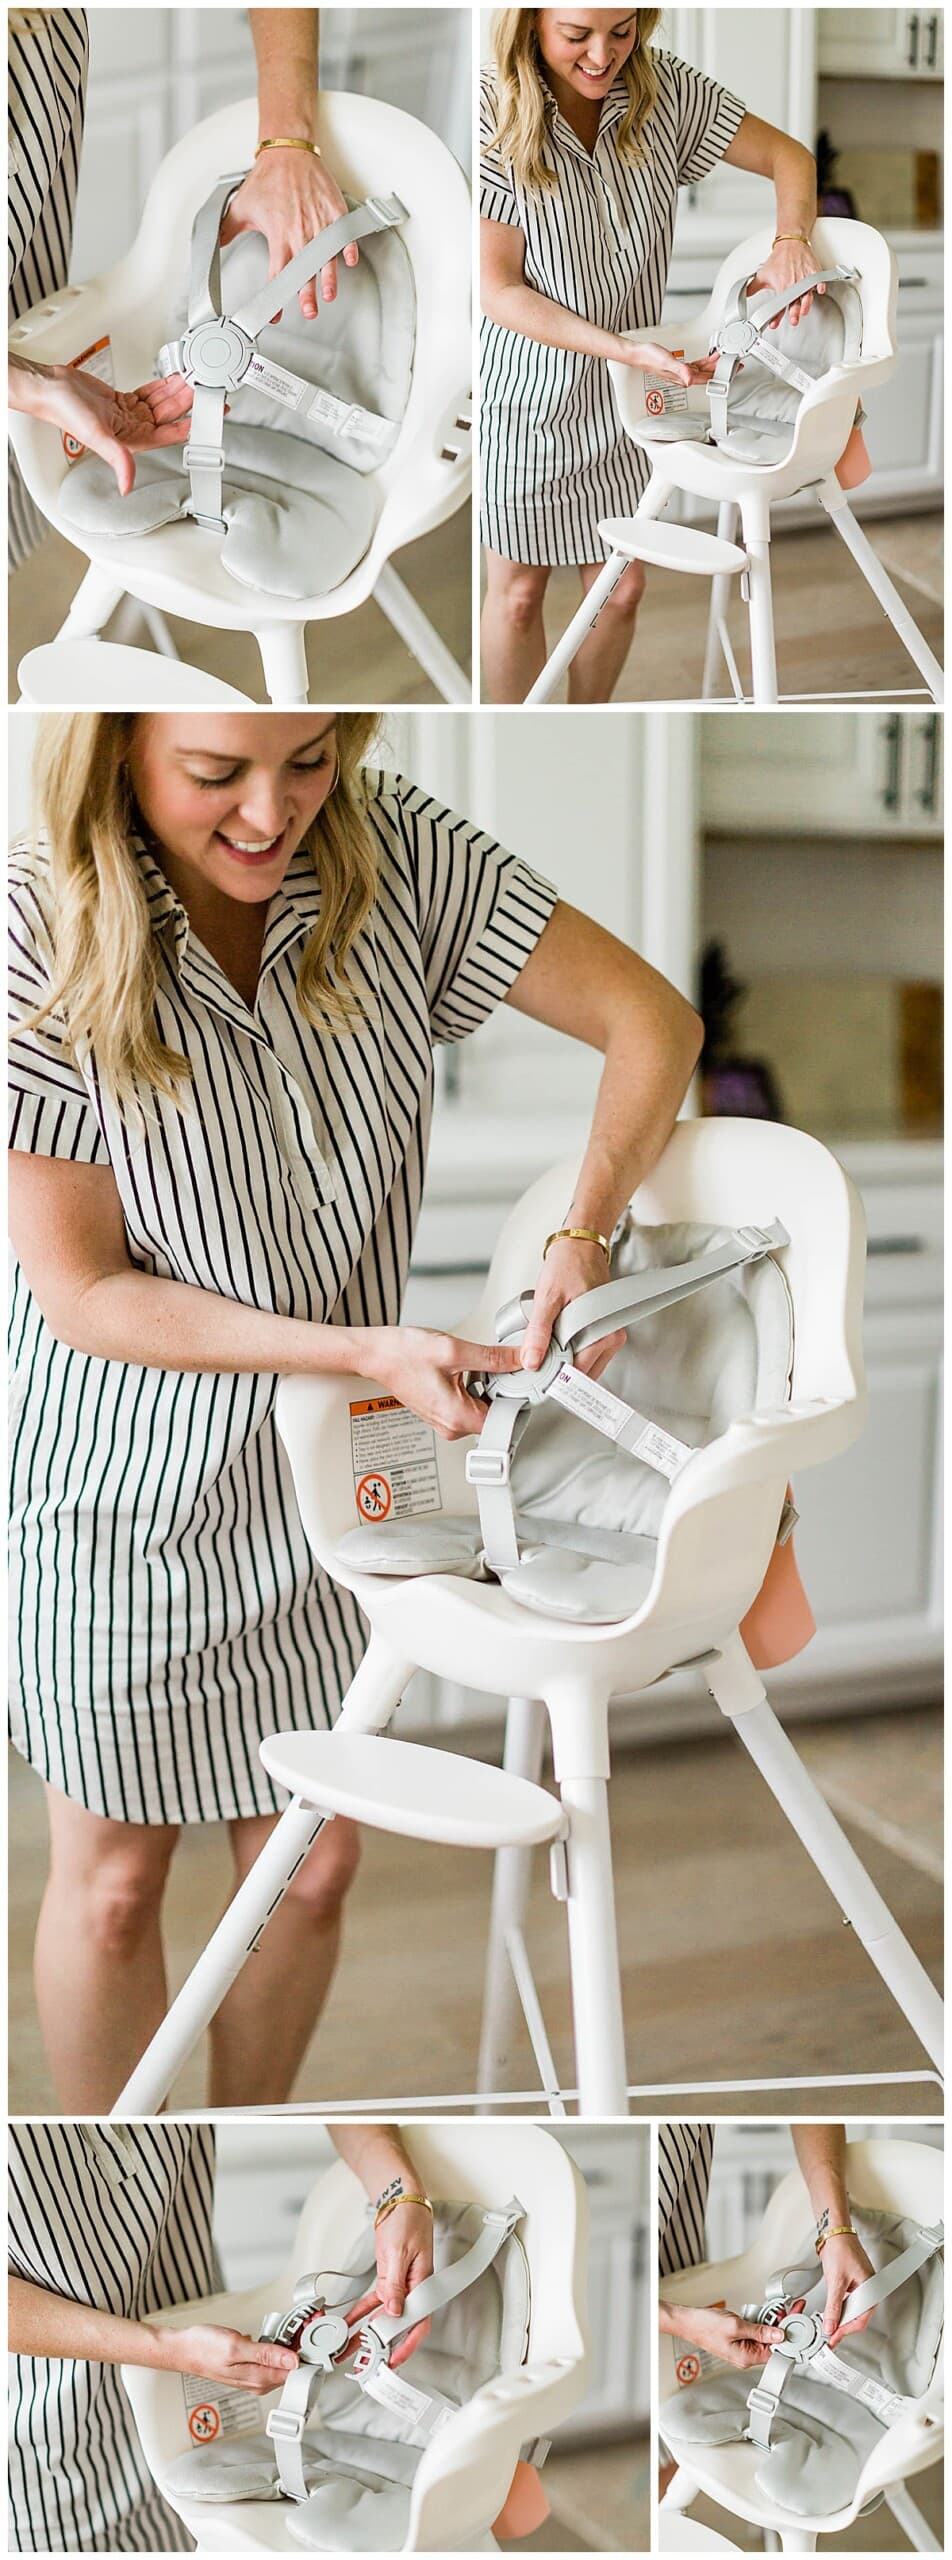 The 5-point harness on the Boon Grub high chair.